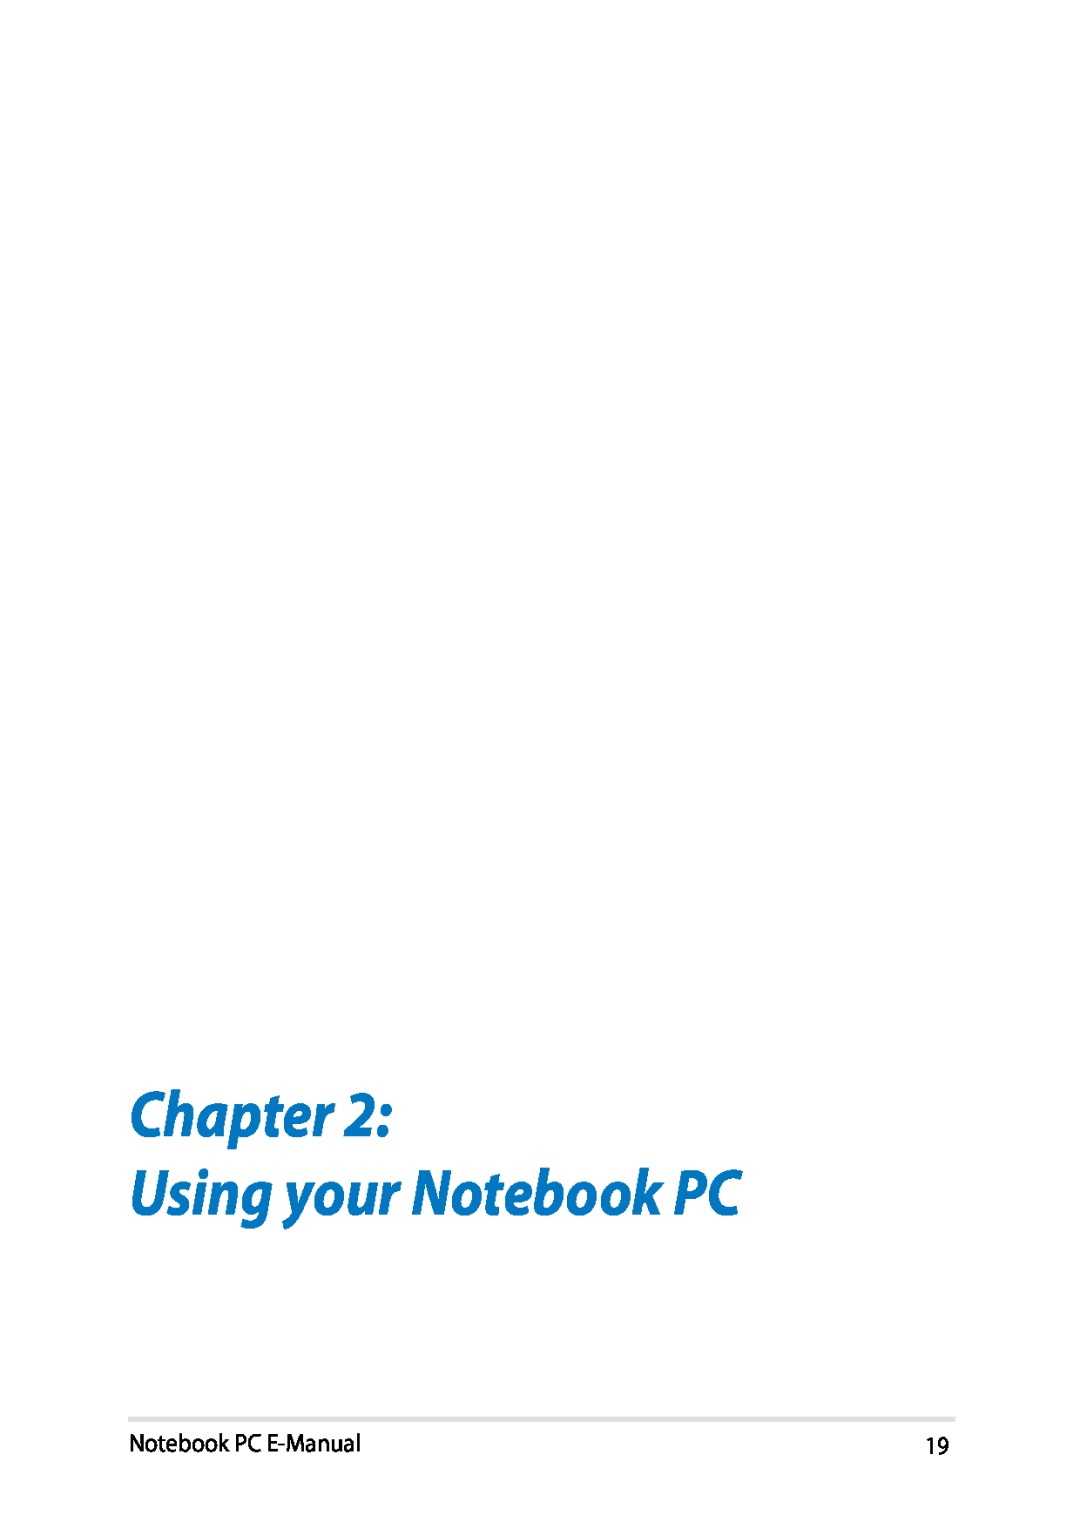 Asus E8438 manual Chapter Using your Notebook PC, Notebook PC E-Manual 